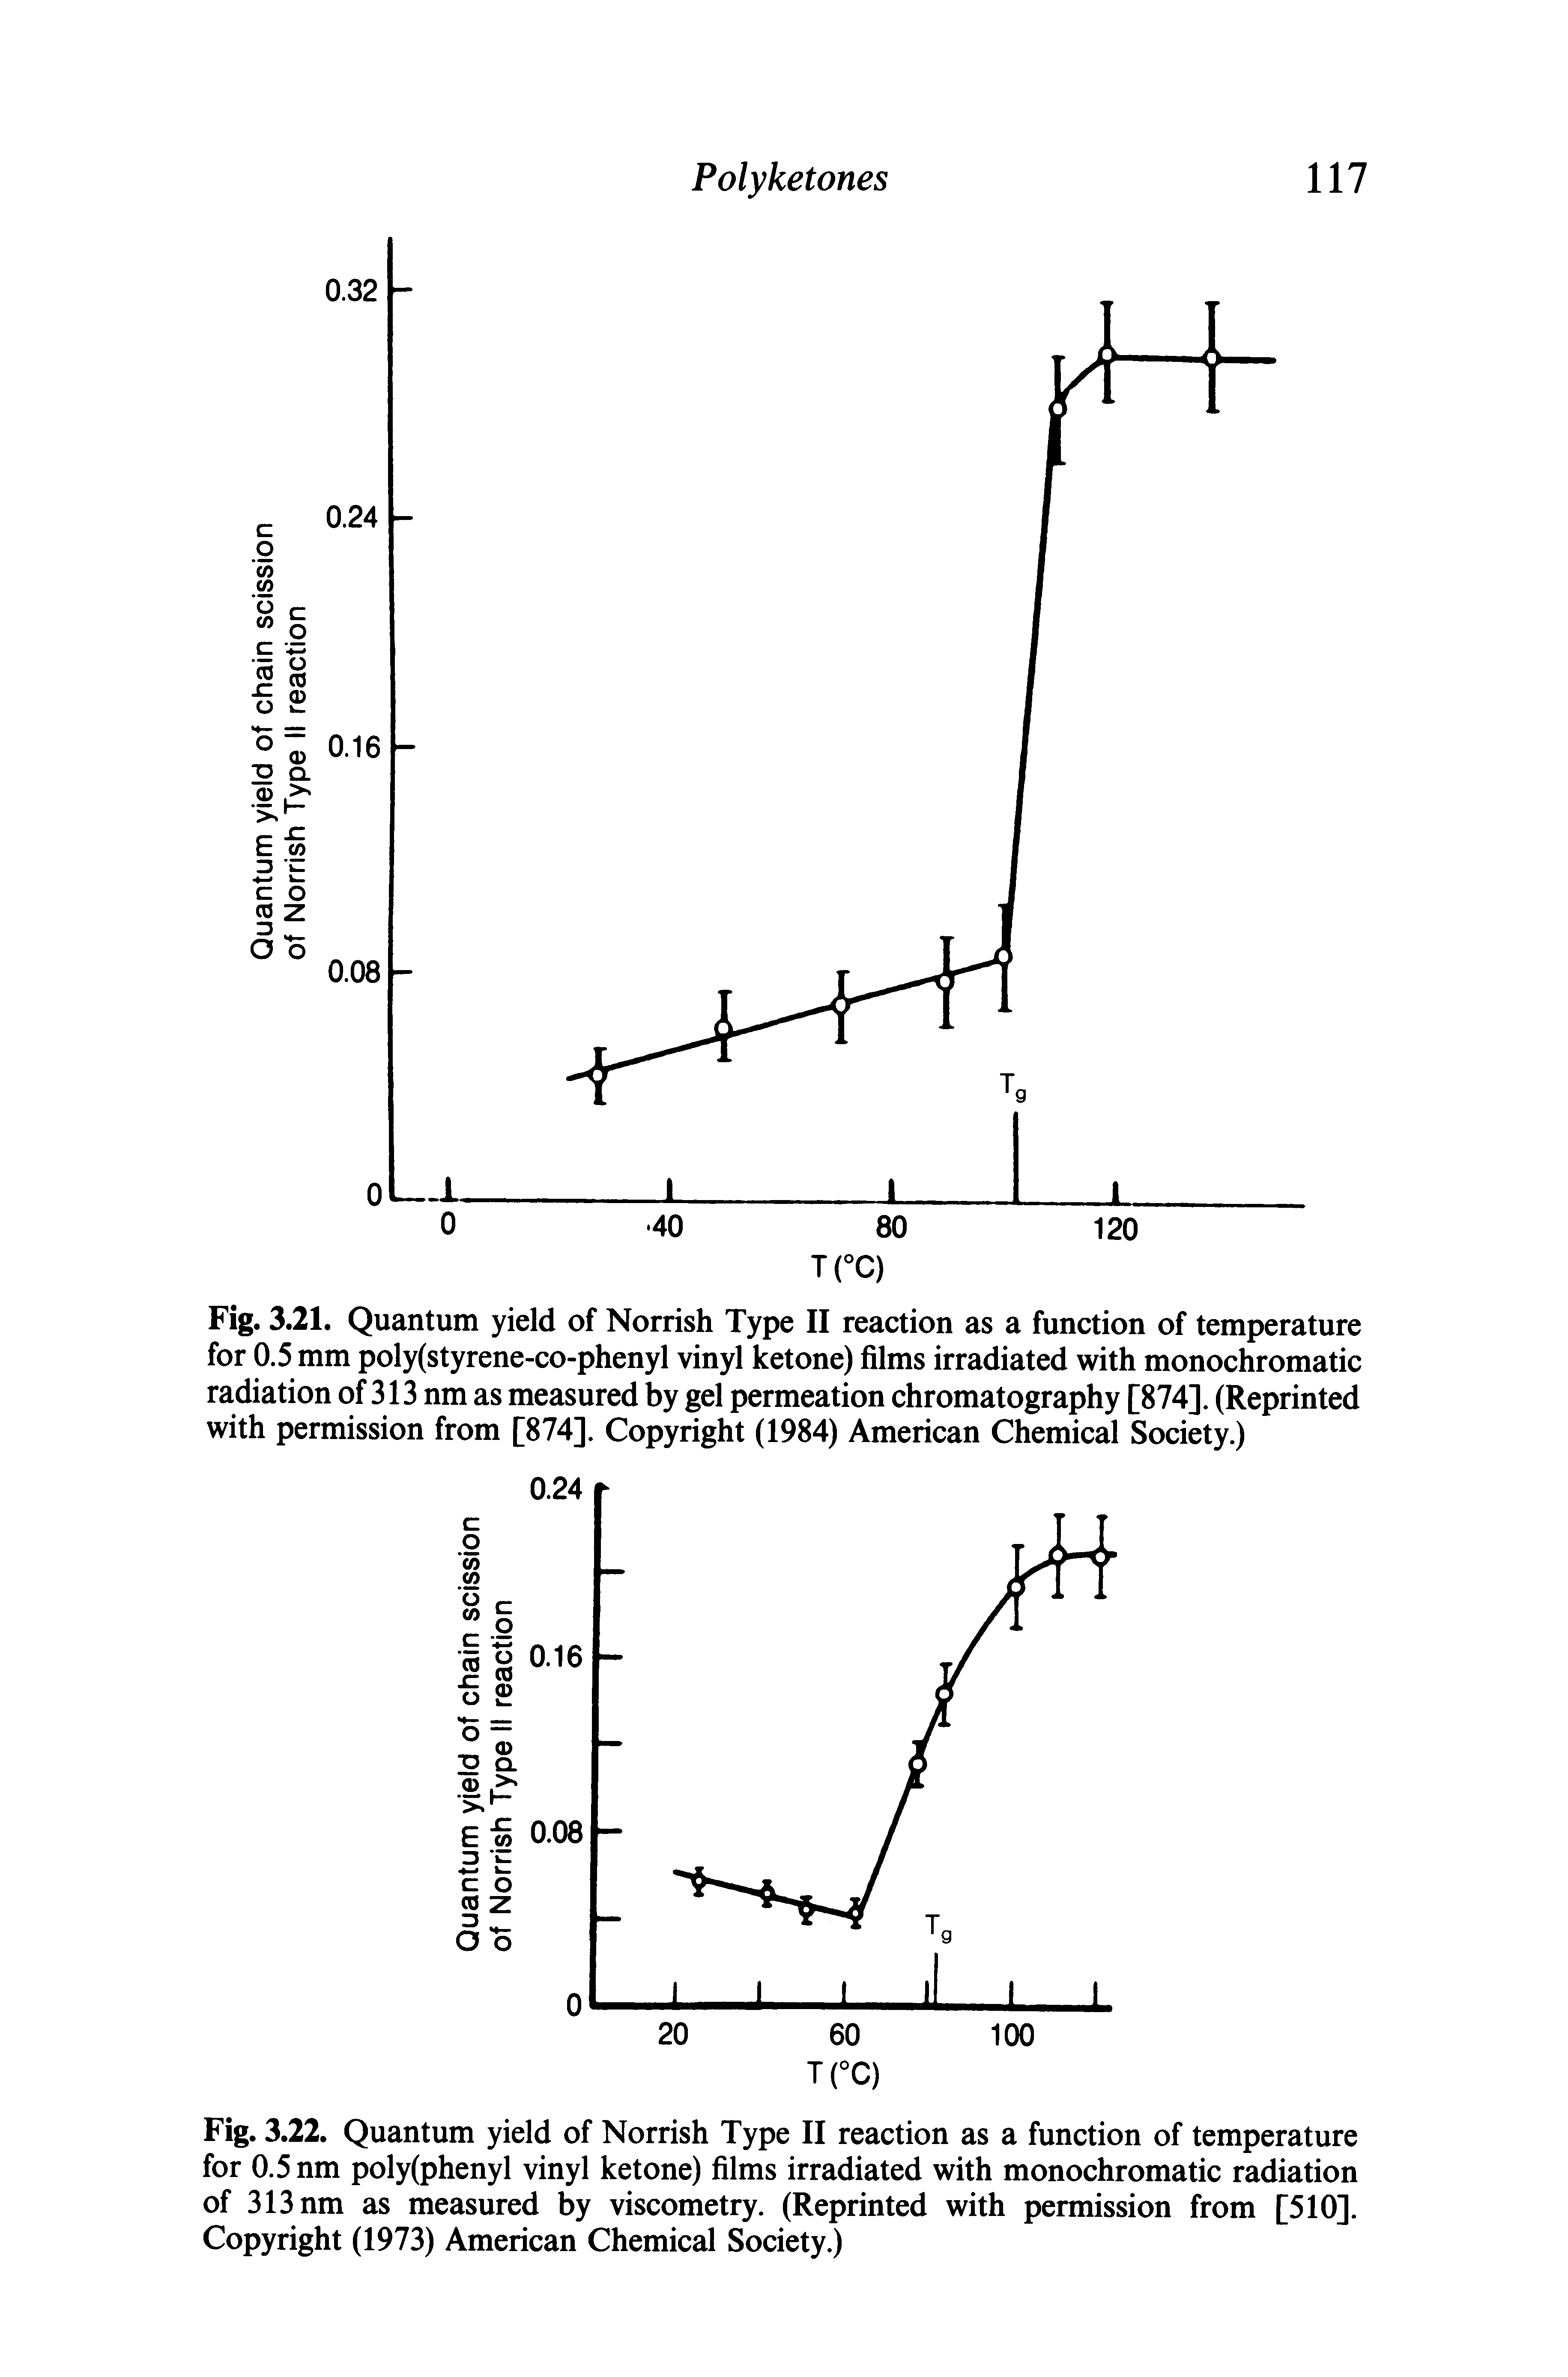 Fig. 3.22. Quantum yield of Norrish Type II reaction as a function of temperature for 0.5 nm poly(phenyl vinyl ketone) films irradiated with monochromatic radiation of 313 nm as measured by viscometry. (Reprinted with permission from [510]. Copyright (1973) American Chemical Society.)...